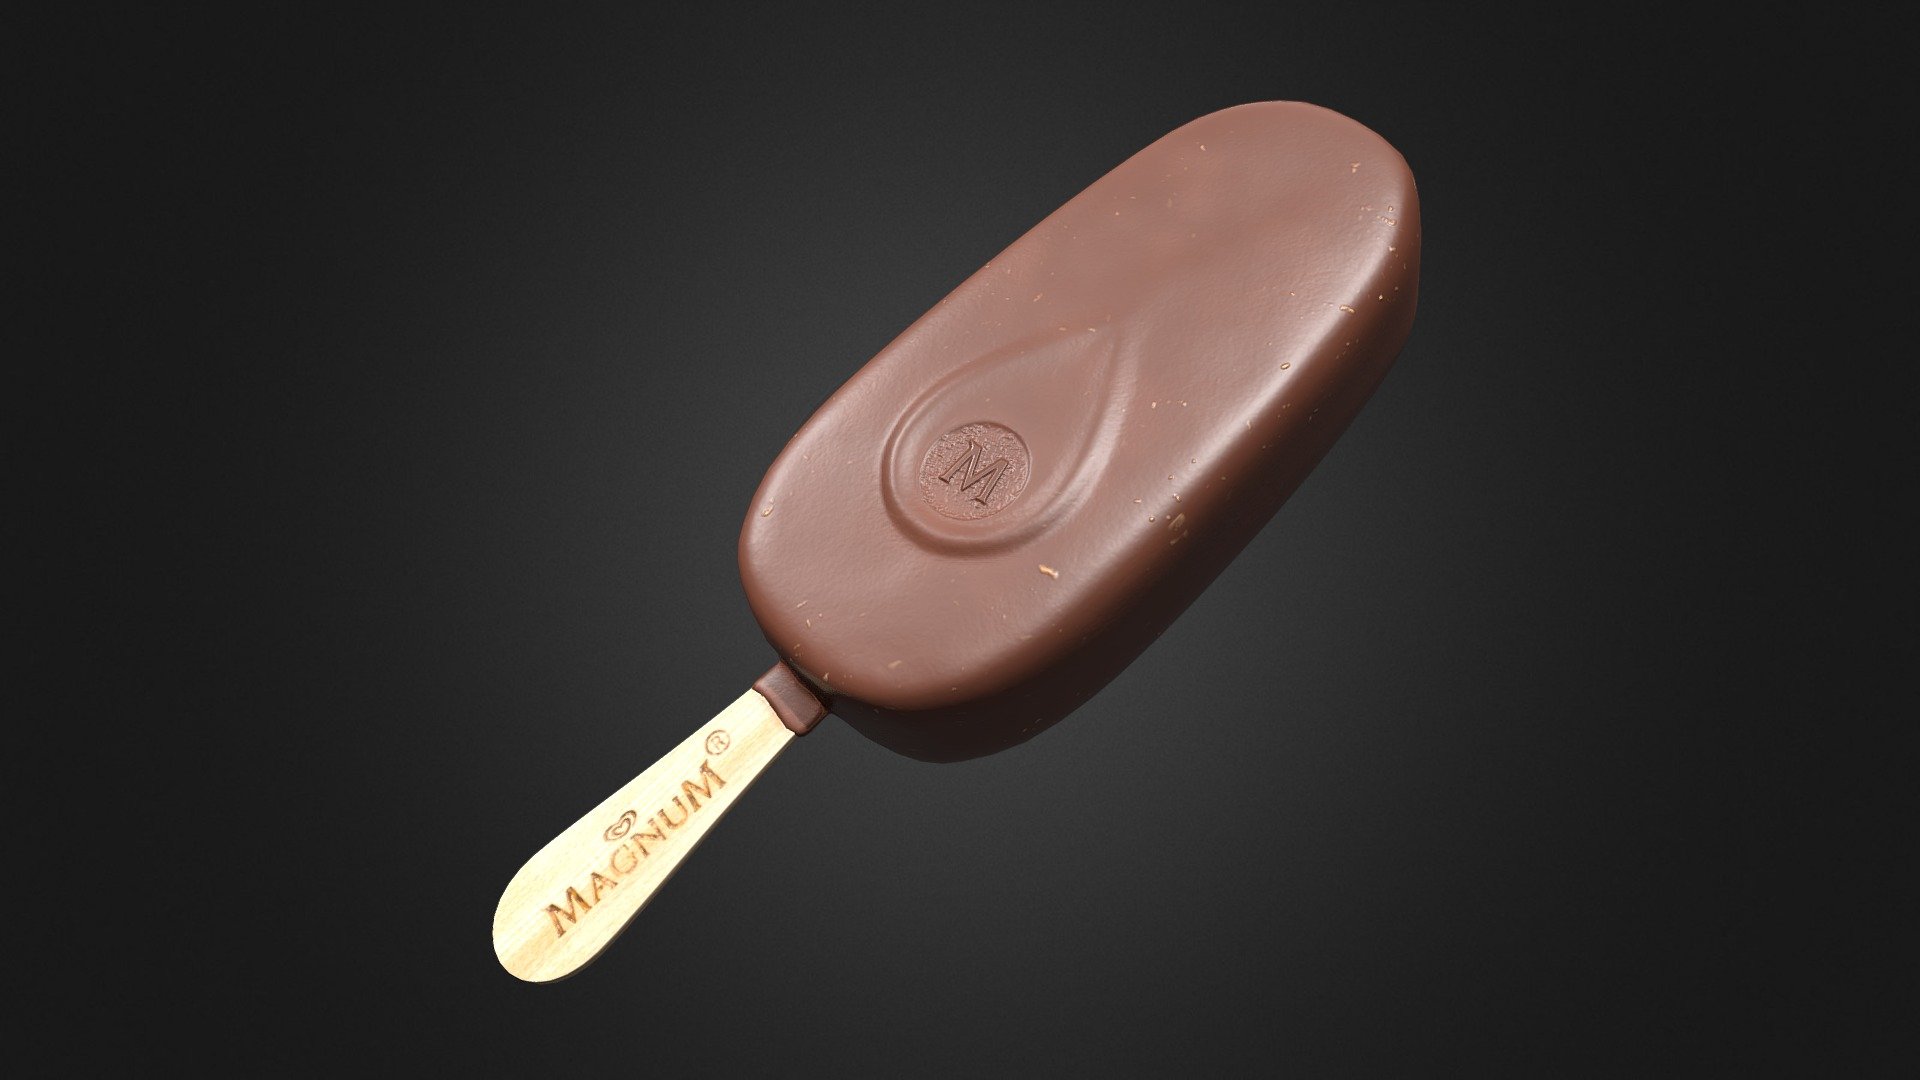 A 3d model commission i did recently. inspired by the Magnum branded icecream bar.
modeled in blender, and textured with substance painter 3d model